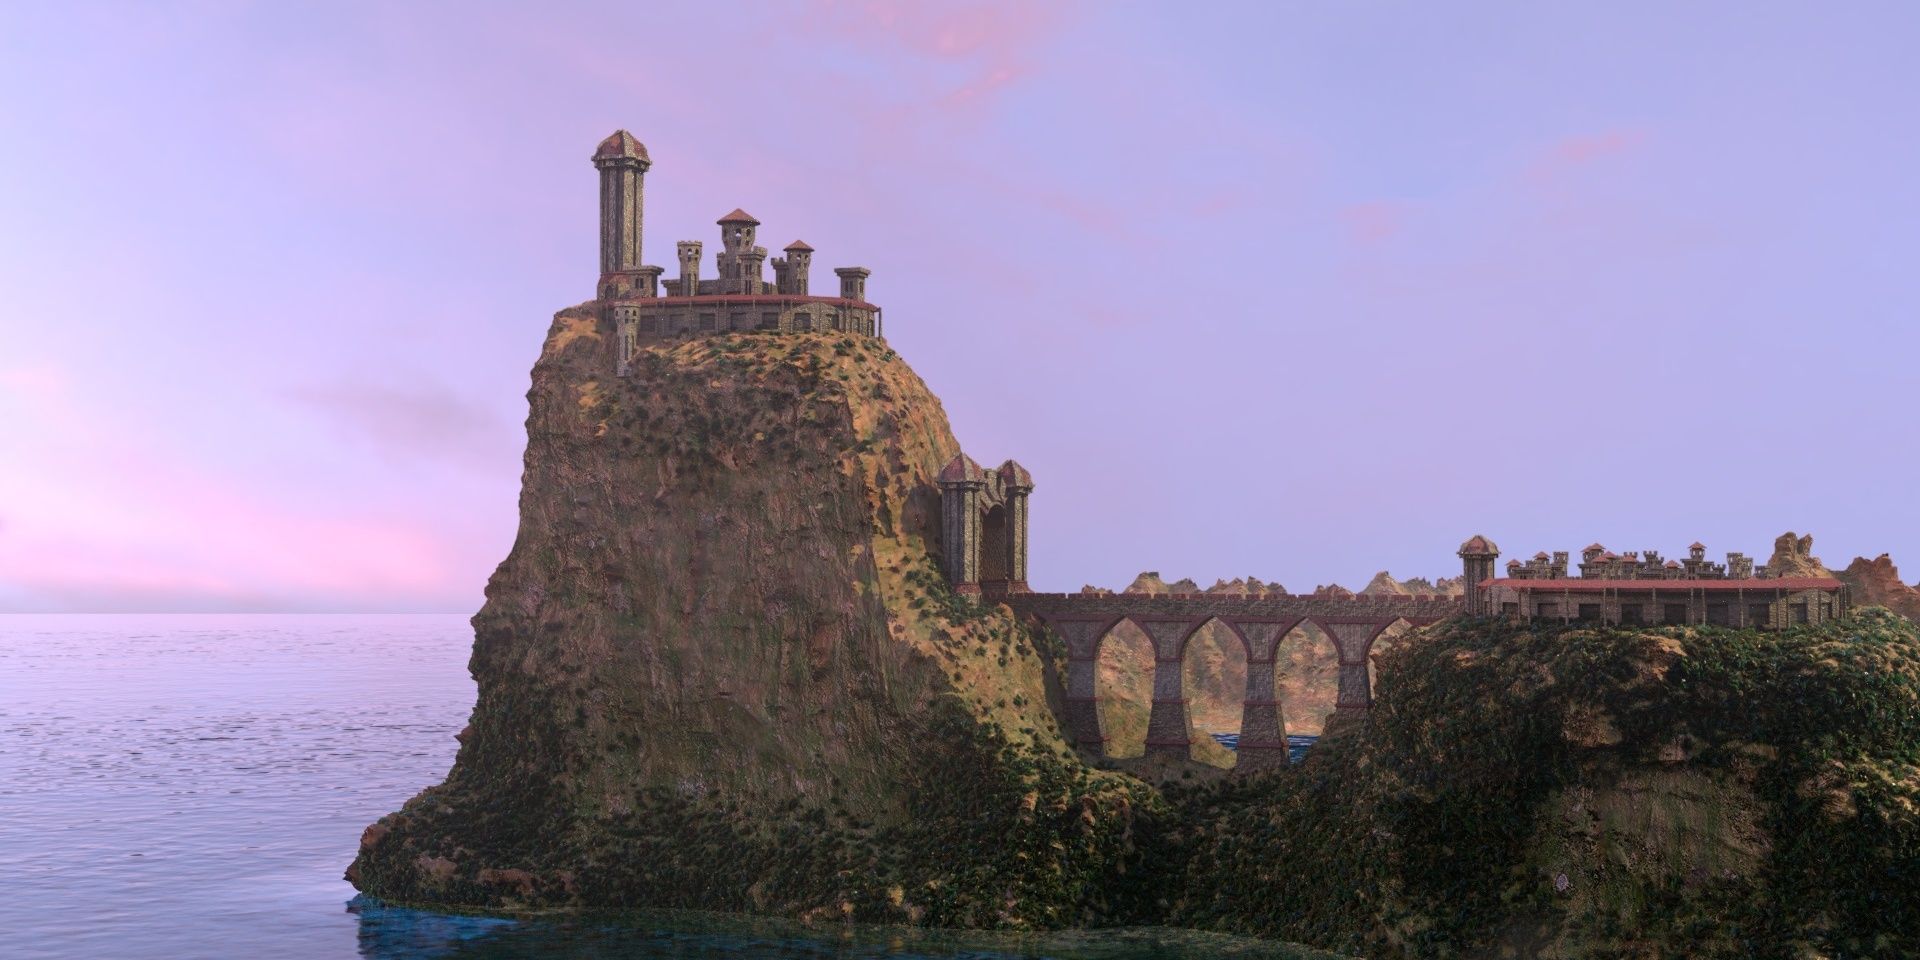 Casterly Rock in Game Of Thrones